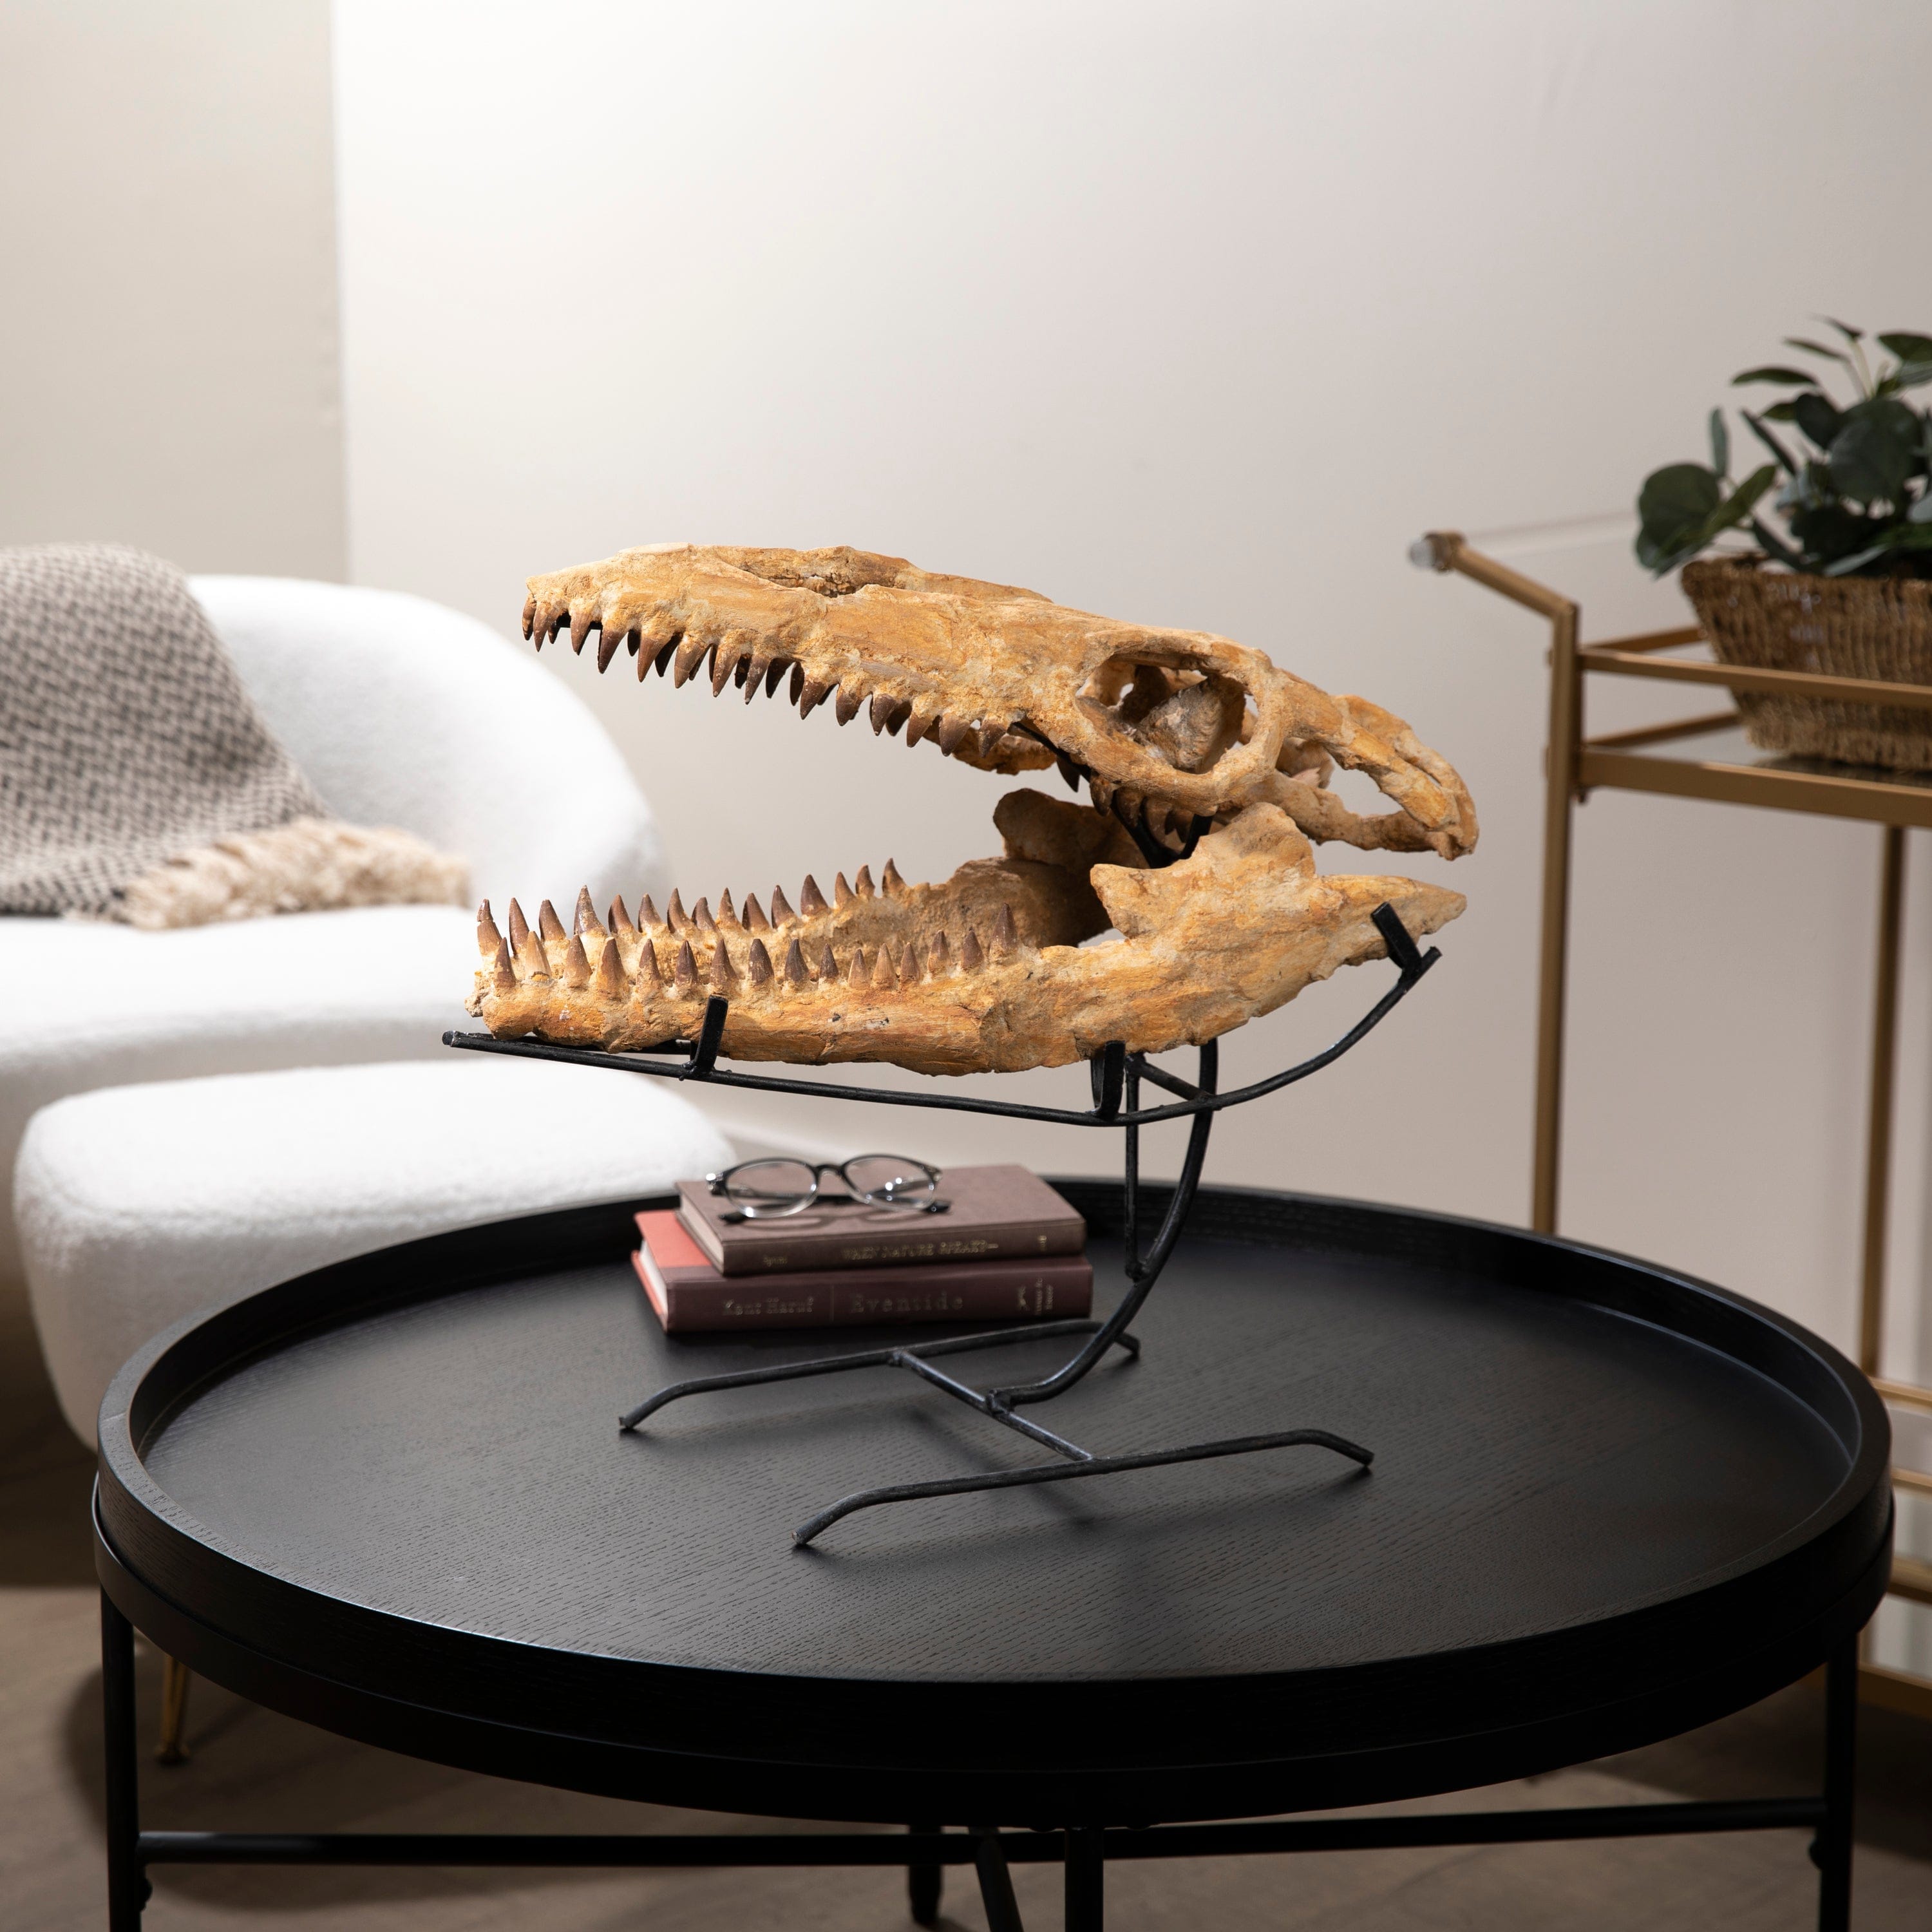 Kalifano Mosasaurus Fossils Moroccan Mosasaurus Jaw Fossil  on Custom Stand - 21" MOST32000.003